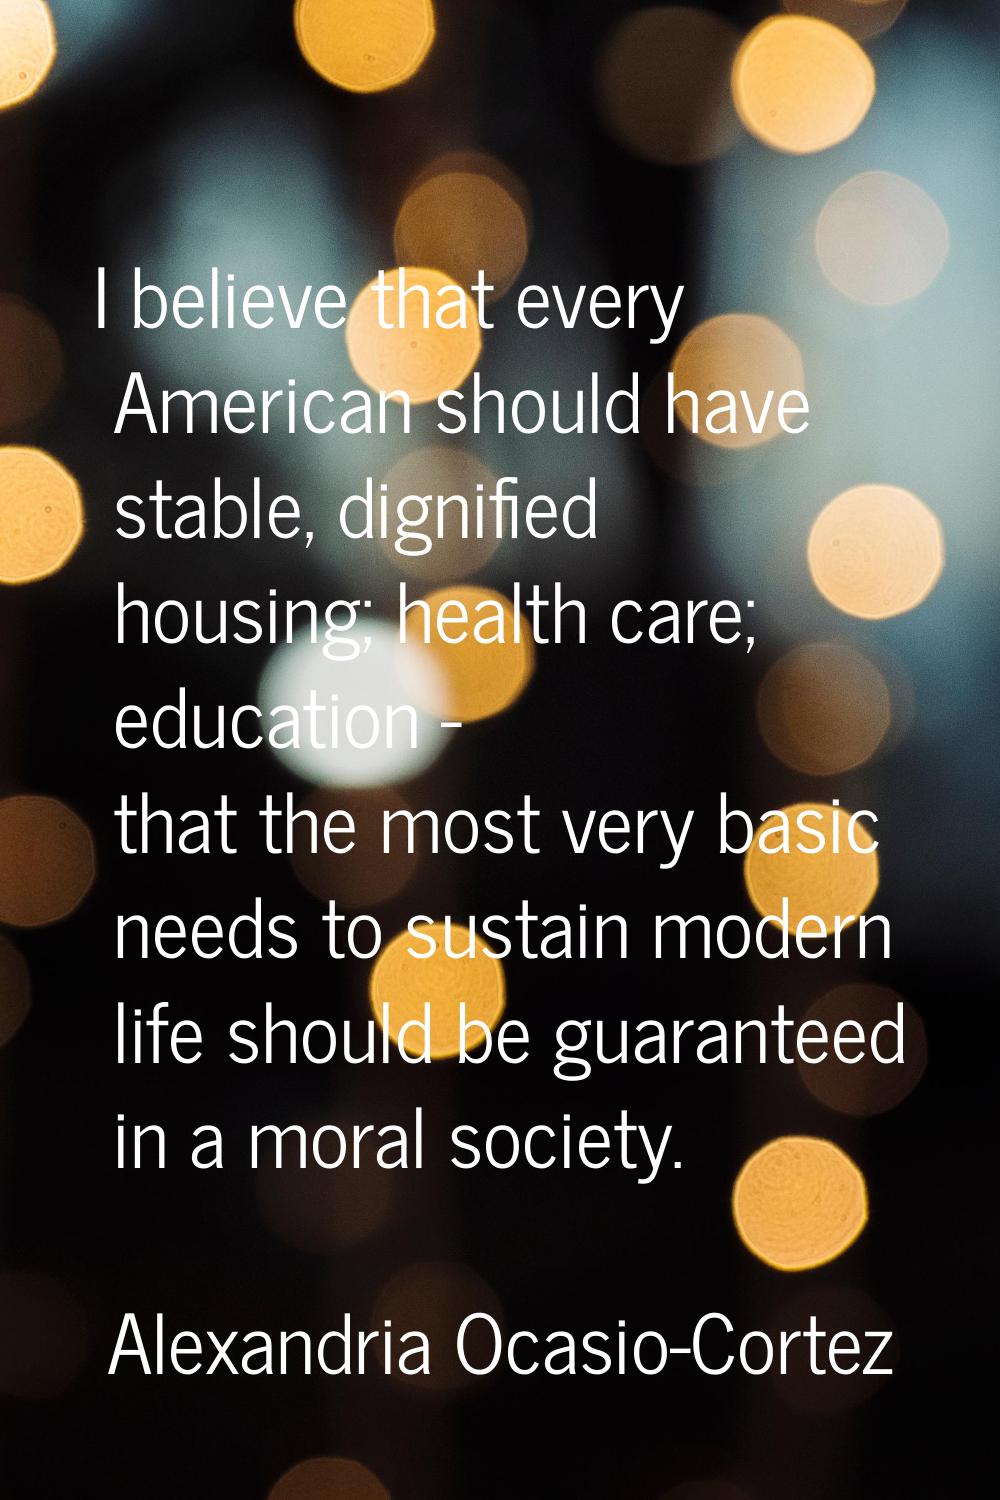 I believe that every American should have stable, dignified housing; health care; education - that 